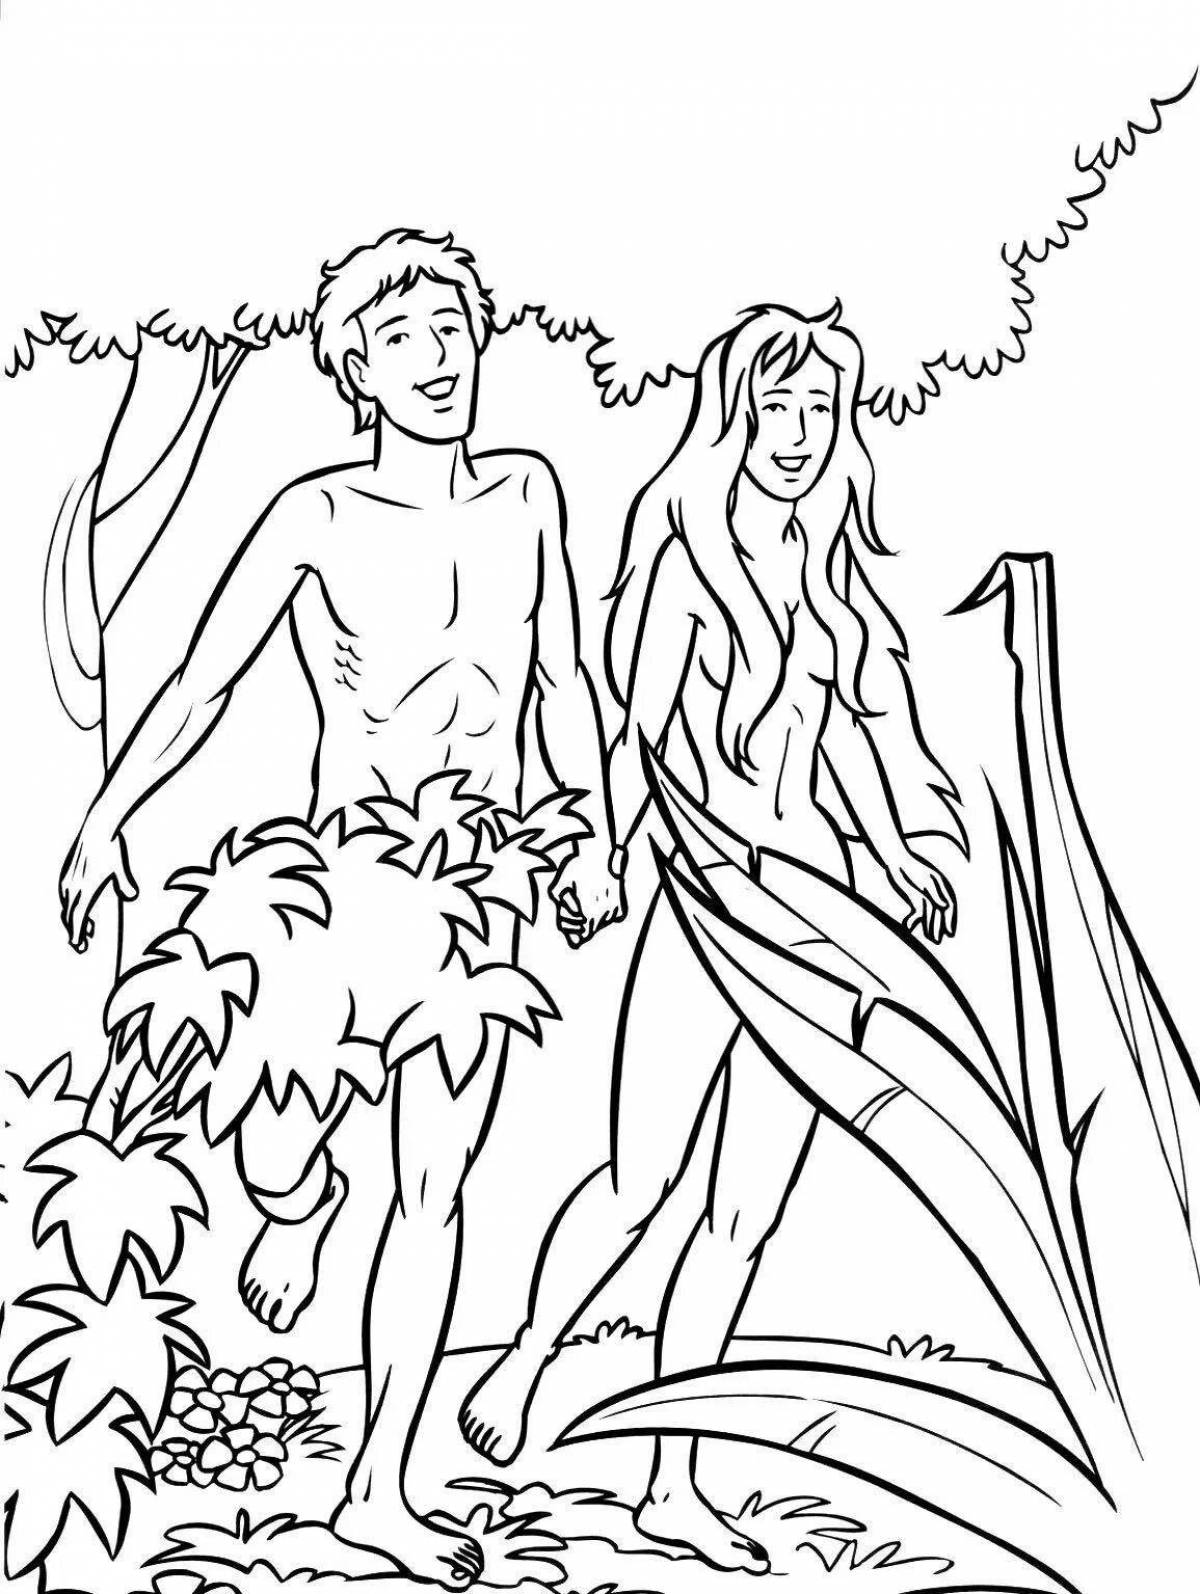 Charming adam and eve coloring book